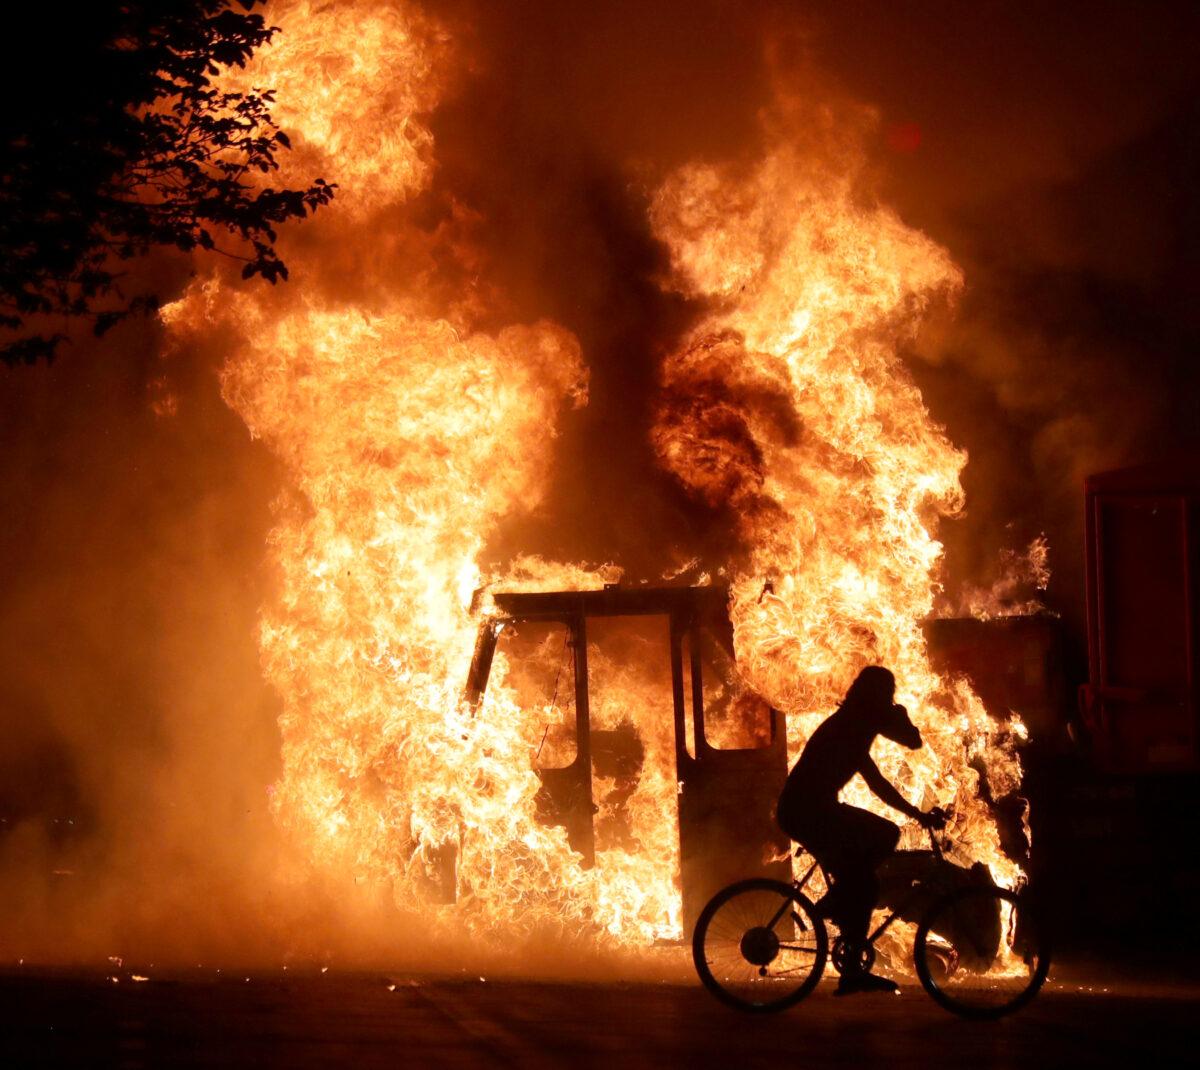 A man on a bike rides past a city truck on fire outside the Kenosha County Courthouse during riots following the police shooting of Jacob Blake in Kenosha, Wis., on Aug. 23, 2020. (Mike De Sisti/Milwaukee Journal Sentinel via USA TODAY via Reuters)